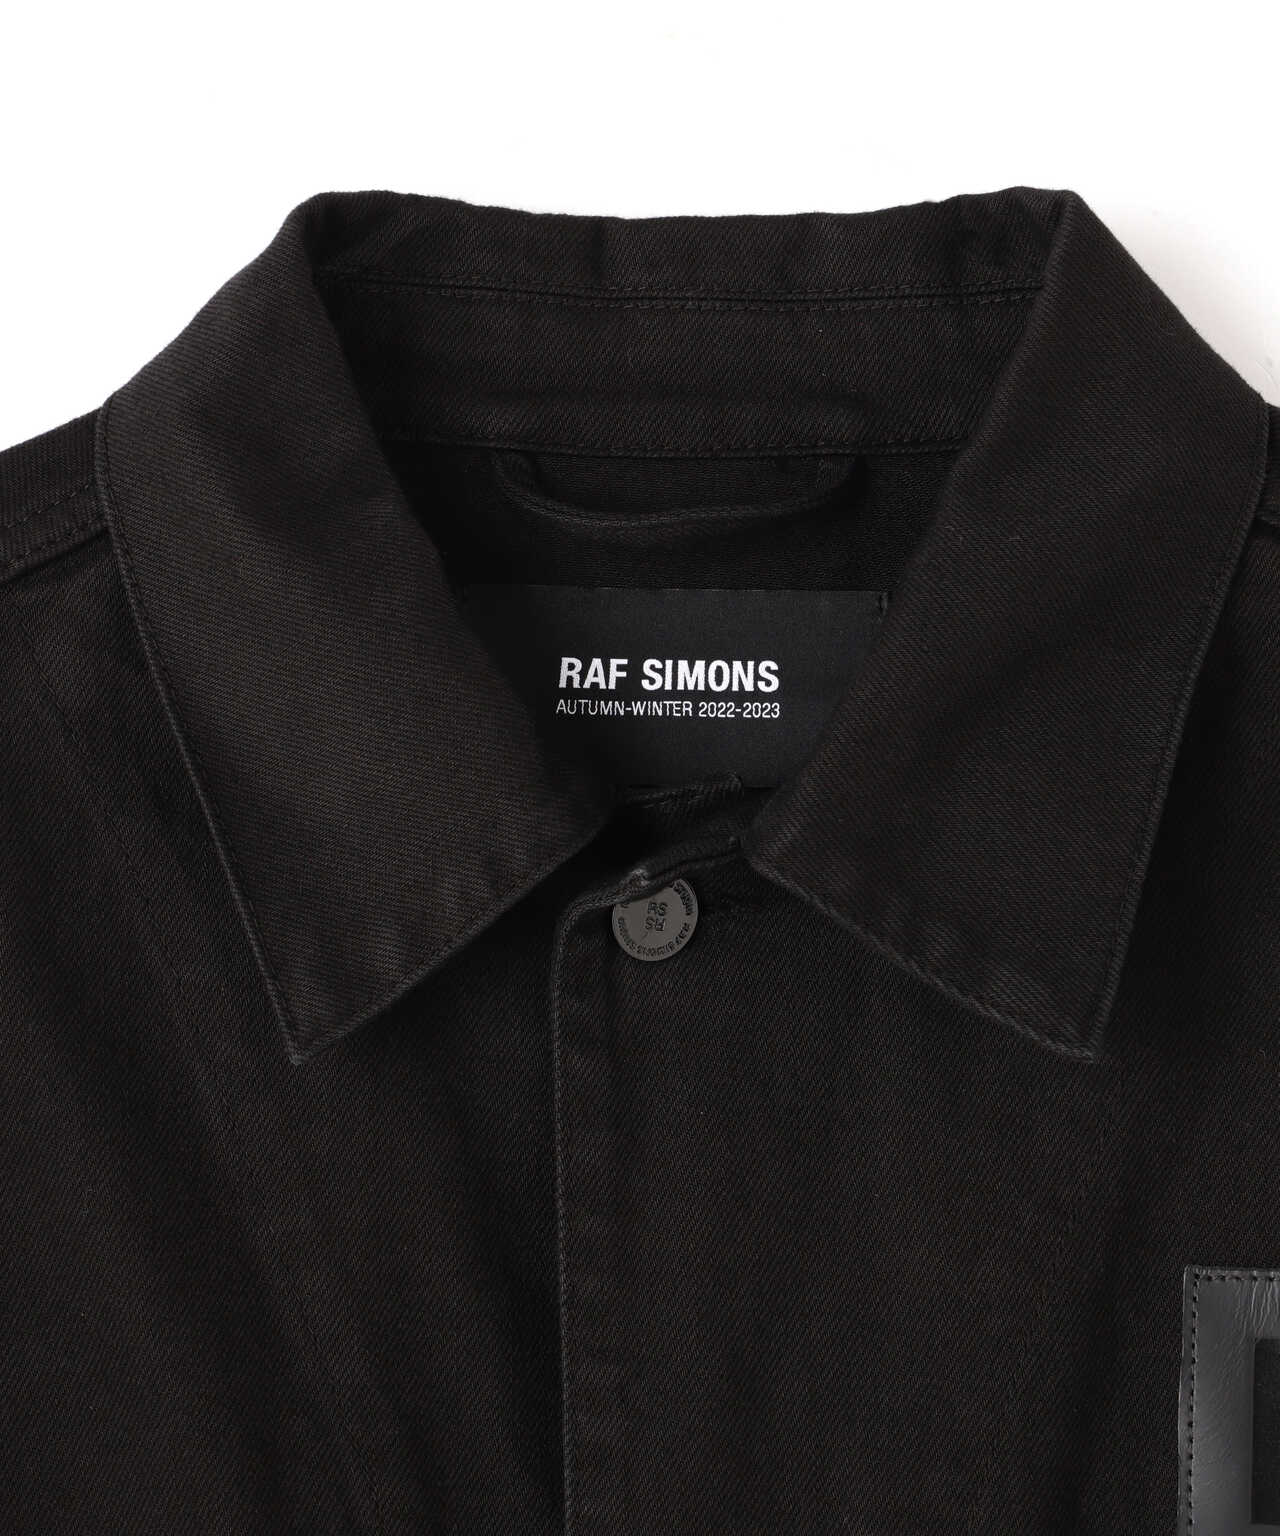 RAF SIMONS/ラフシモンズ/Denim Jacket With Leather Patch | LHP ...